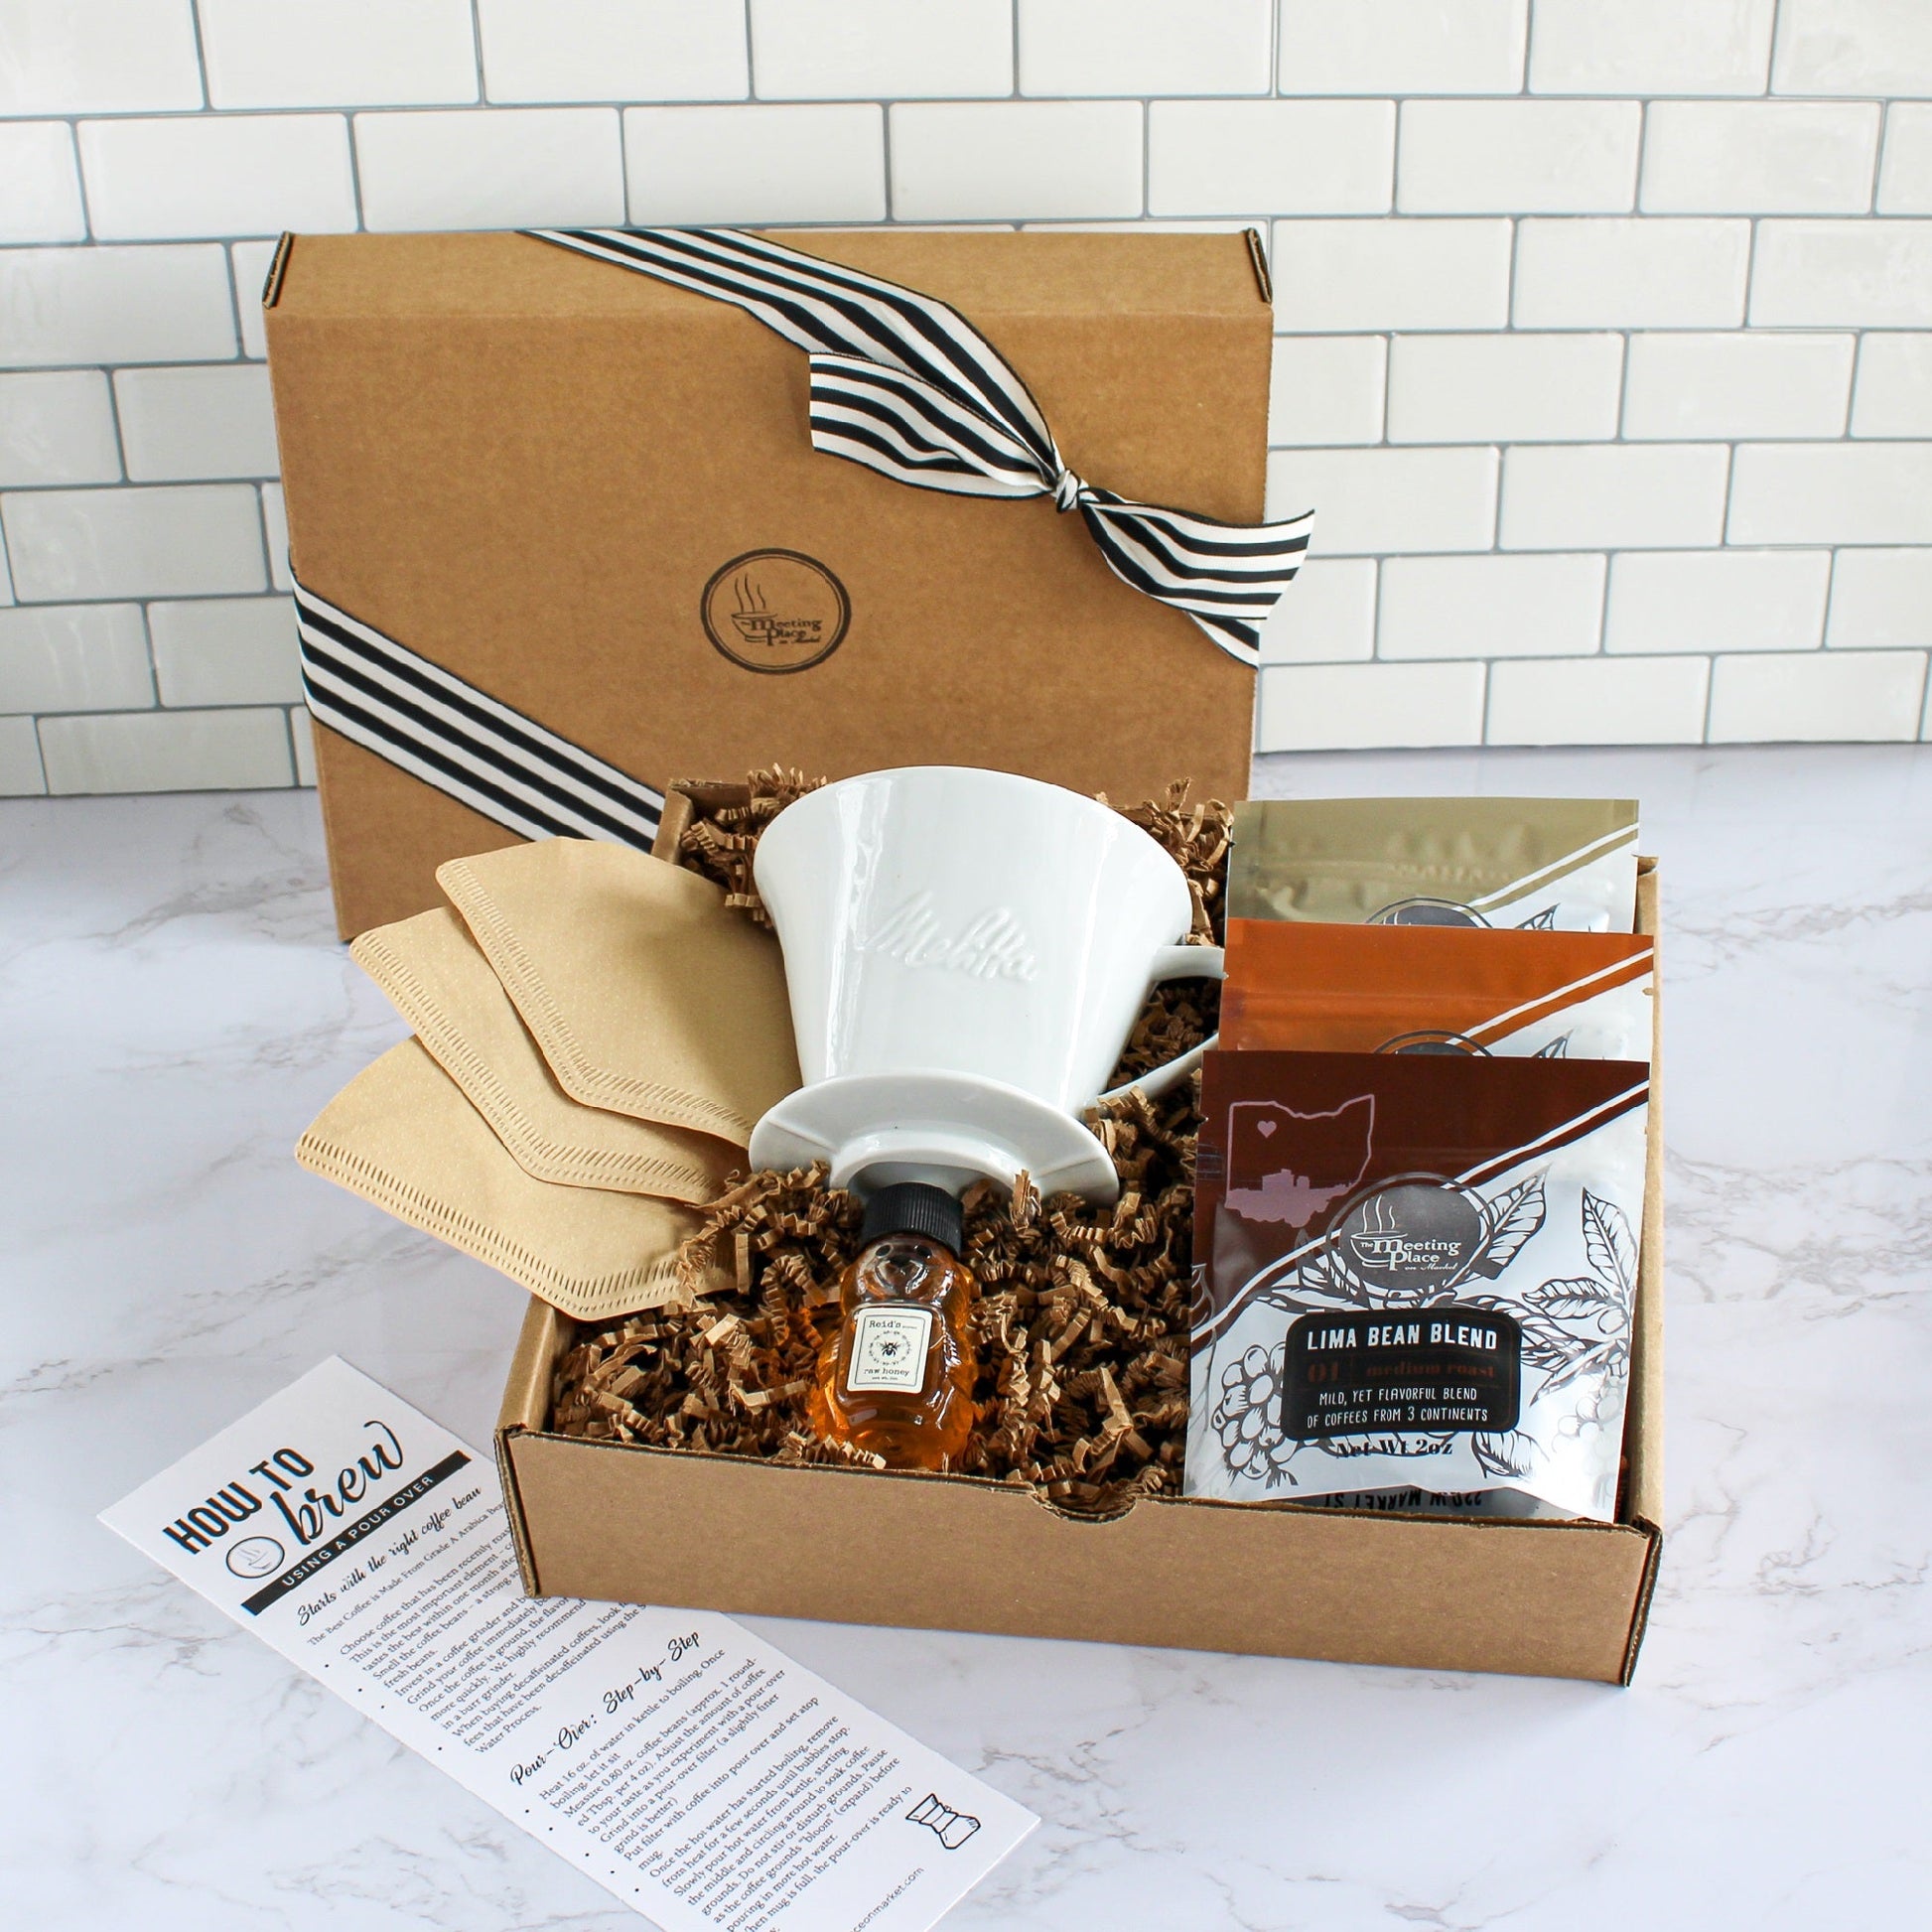 Pour Over Coffee Starter Set with Ceramic Cone and Gourmet Coffee Subscription Box - The Meeting Place on Market